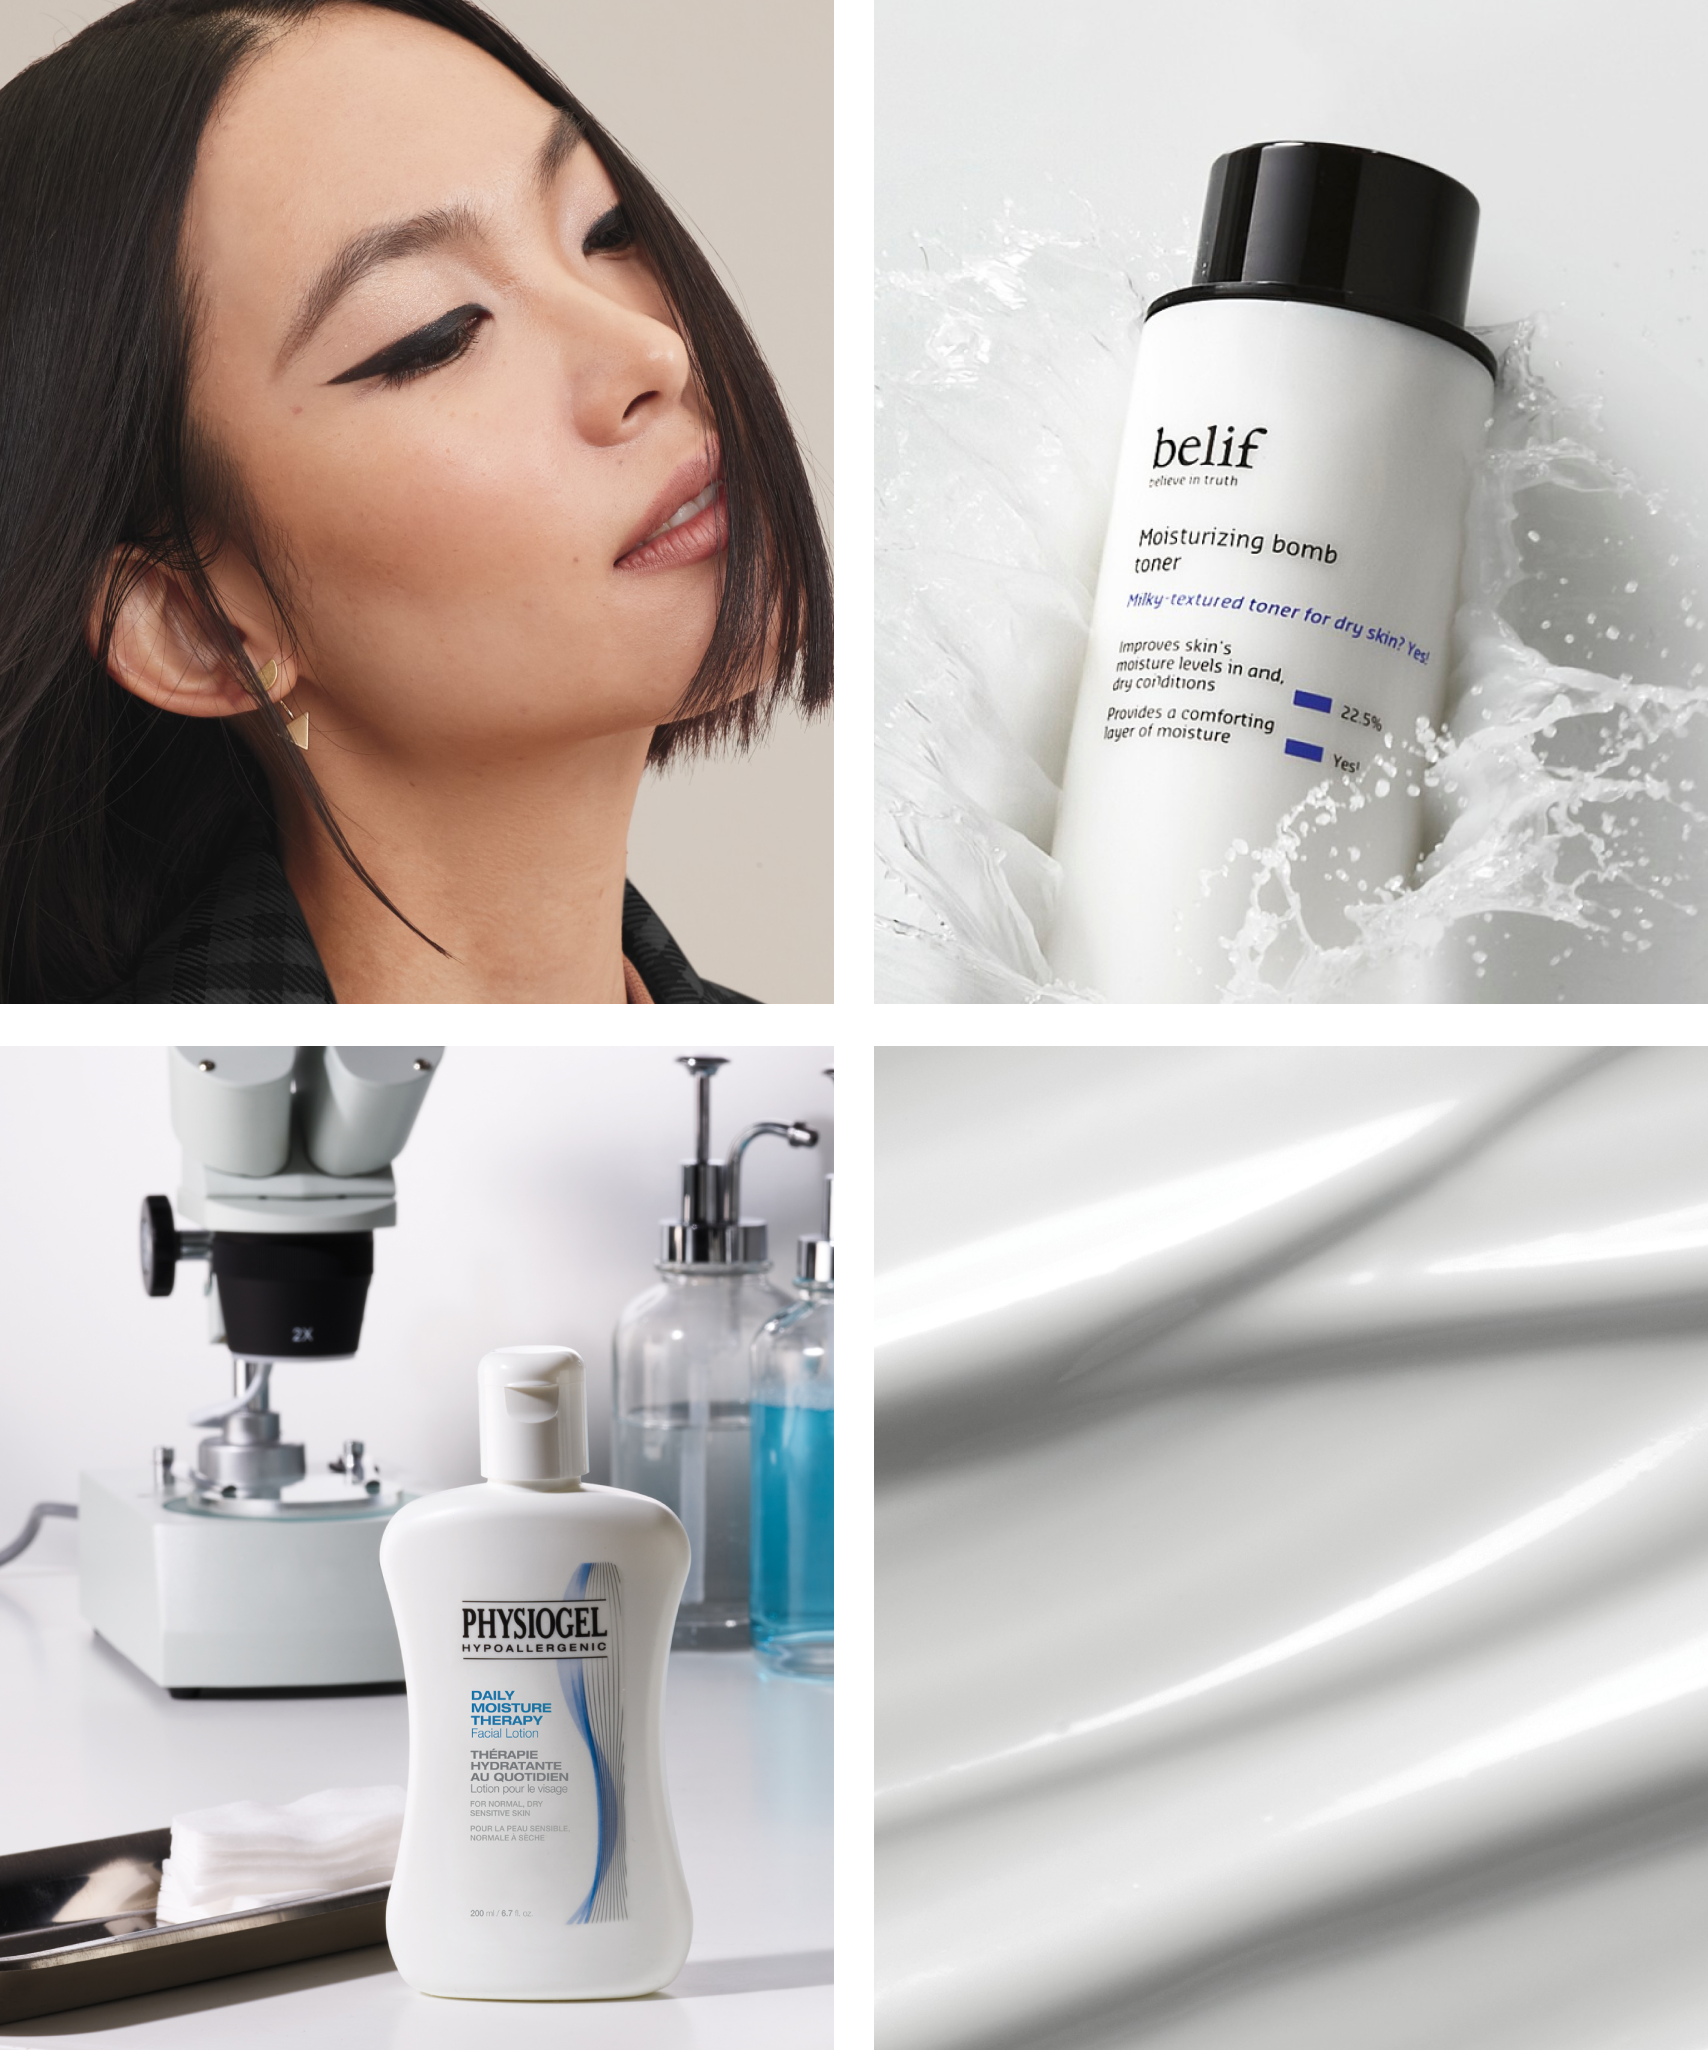 A collage including pictures of a model with a slight smile, a bottle of belif moisturizing bomb toner, and a bottle of Physiogel product.